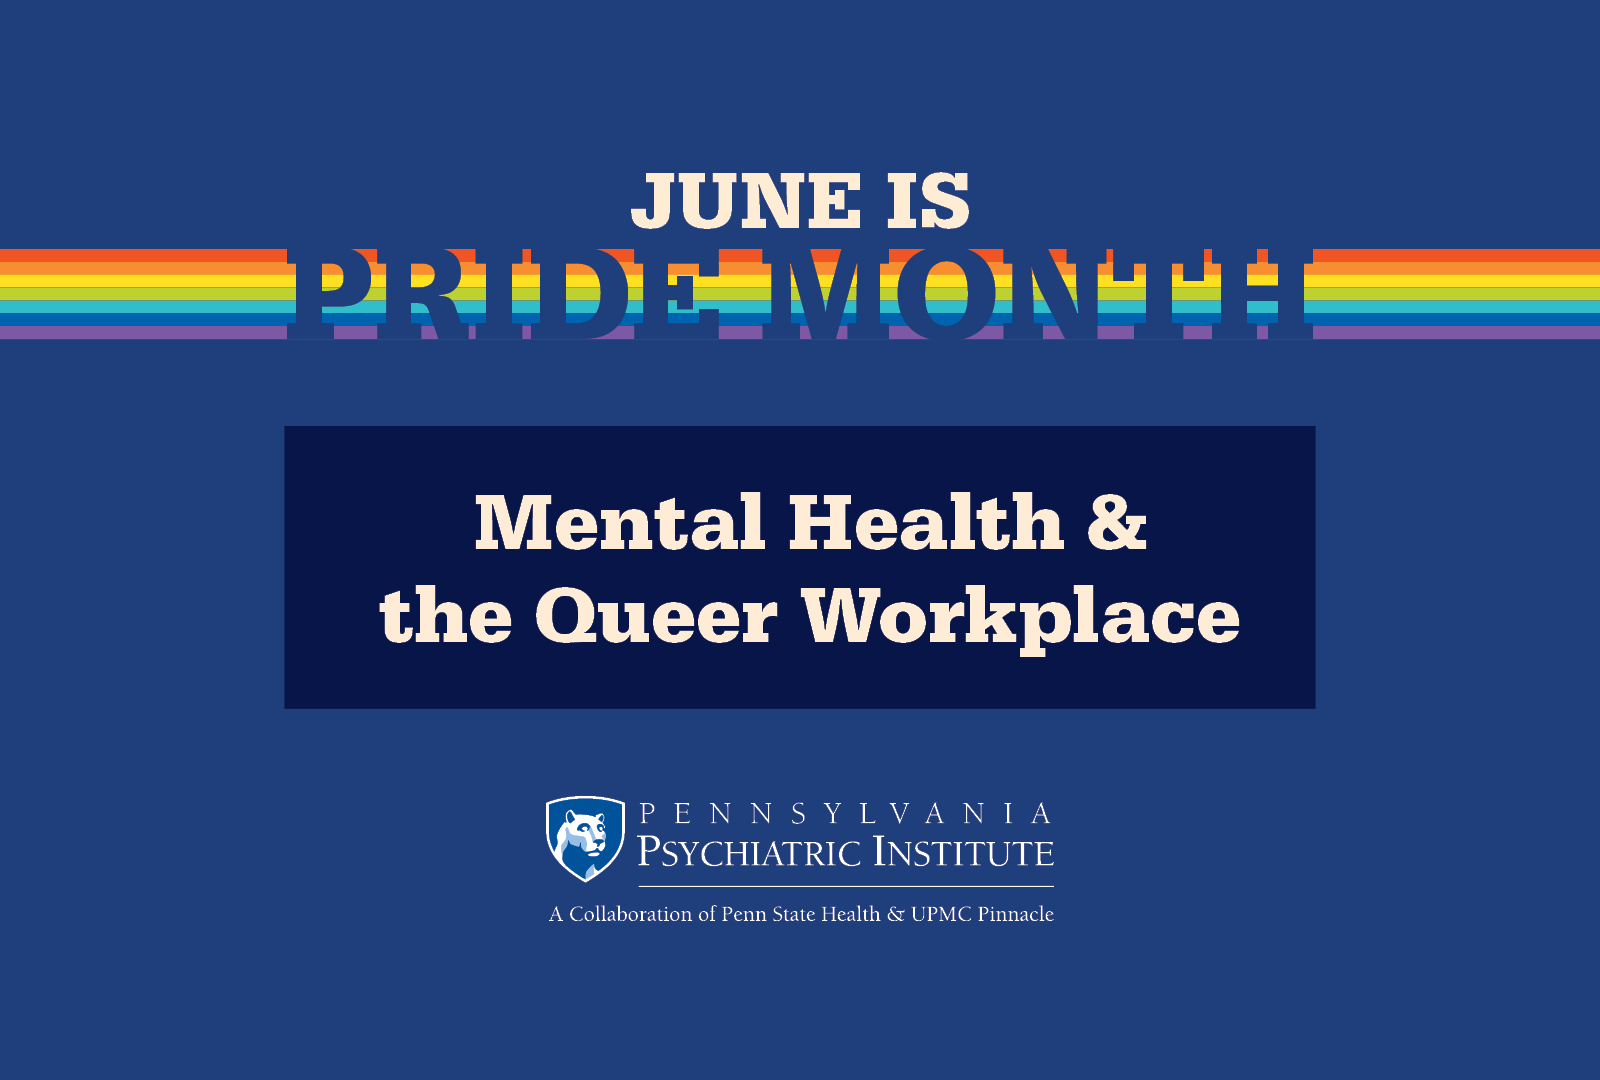 Mental Health & the Queer Workplace